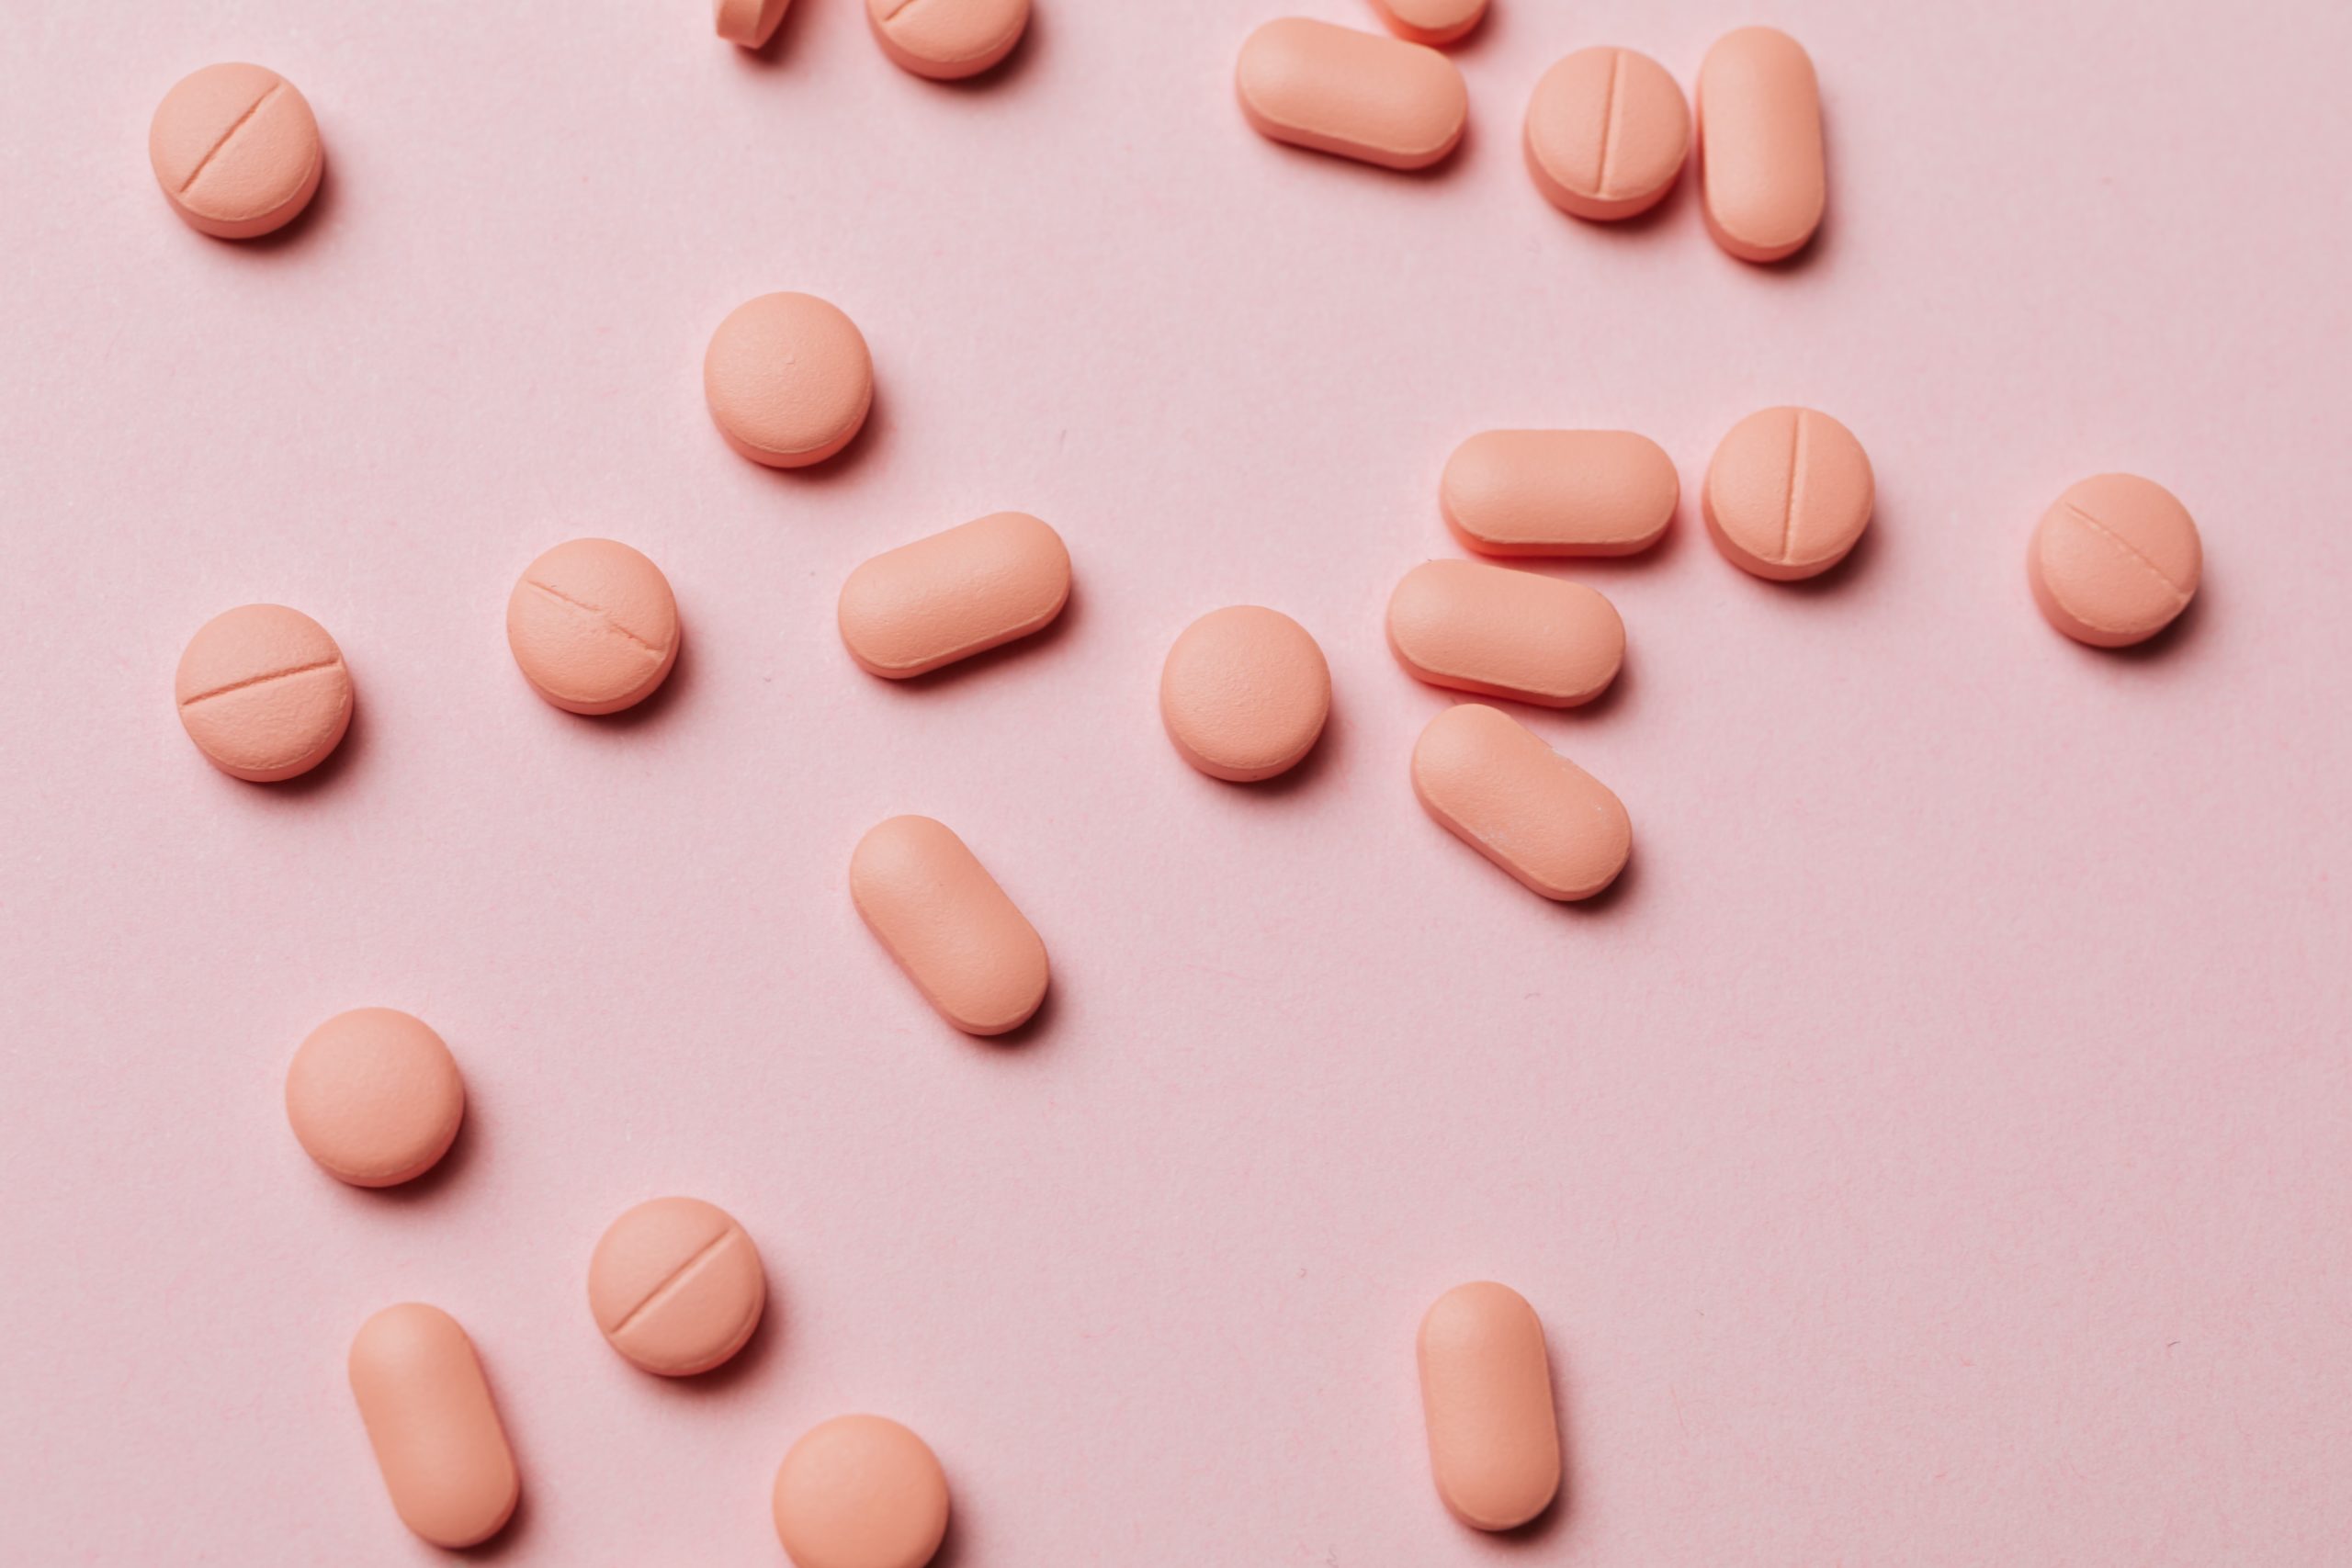 5 Things You Need to Know About Fertility Supplements